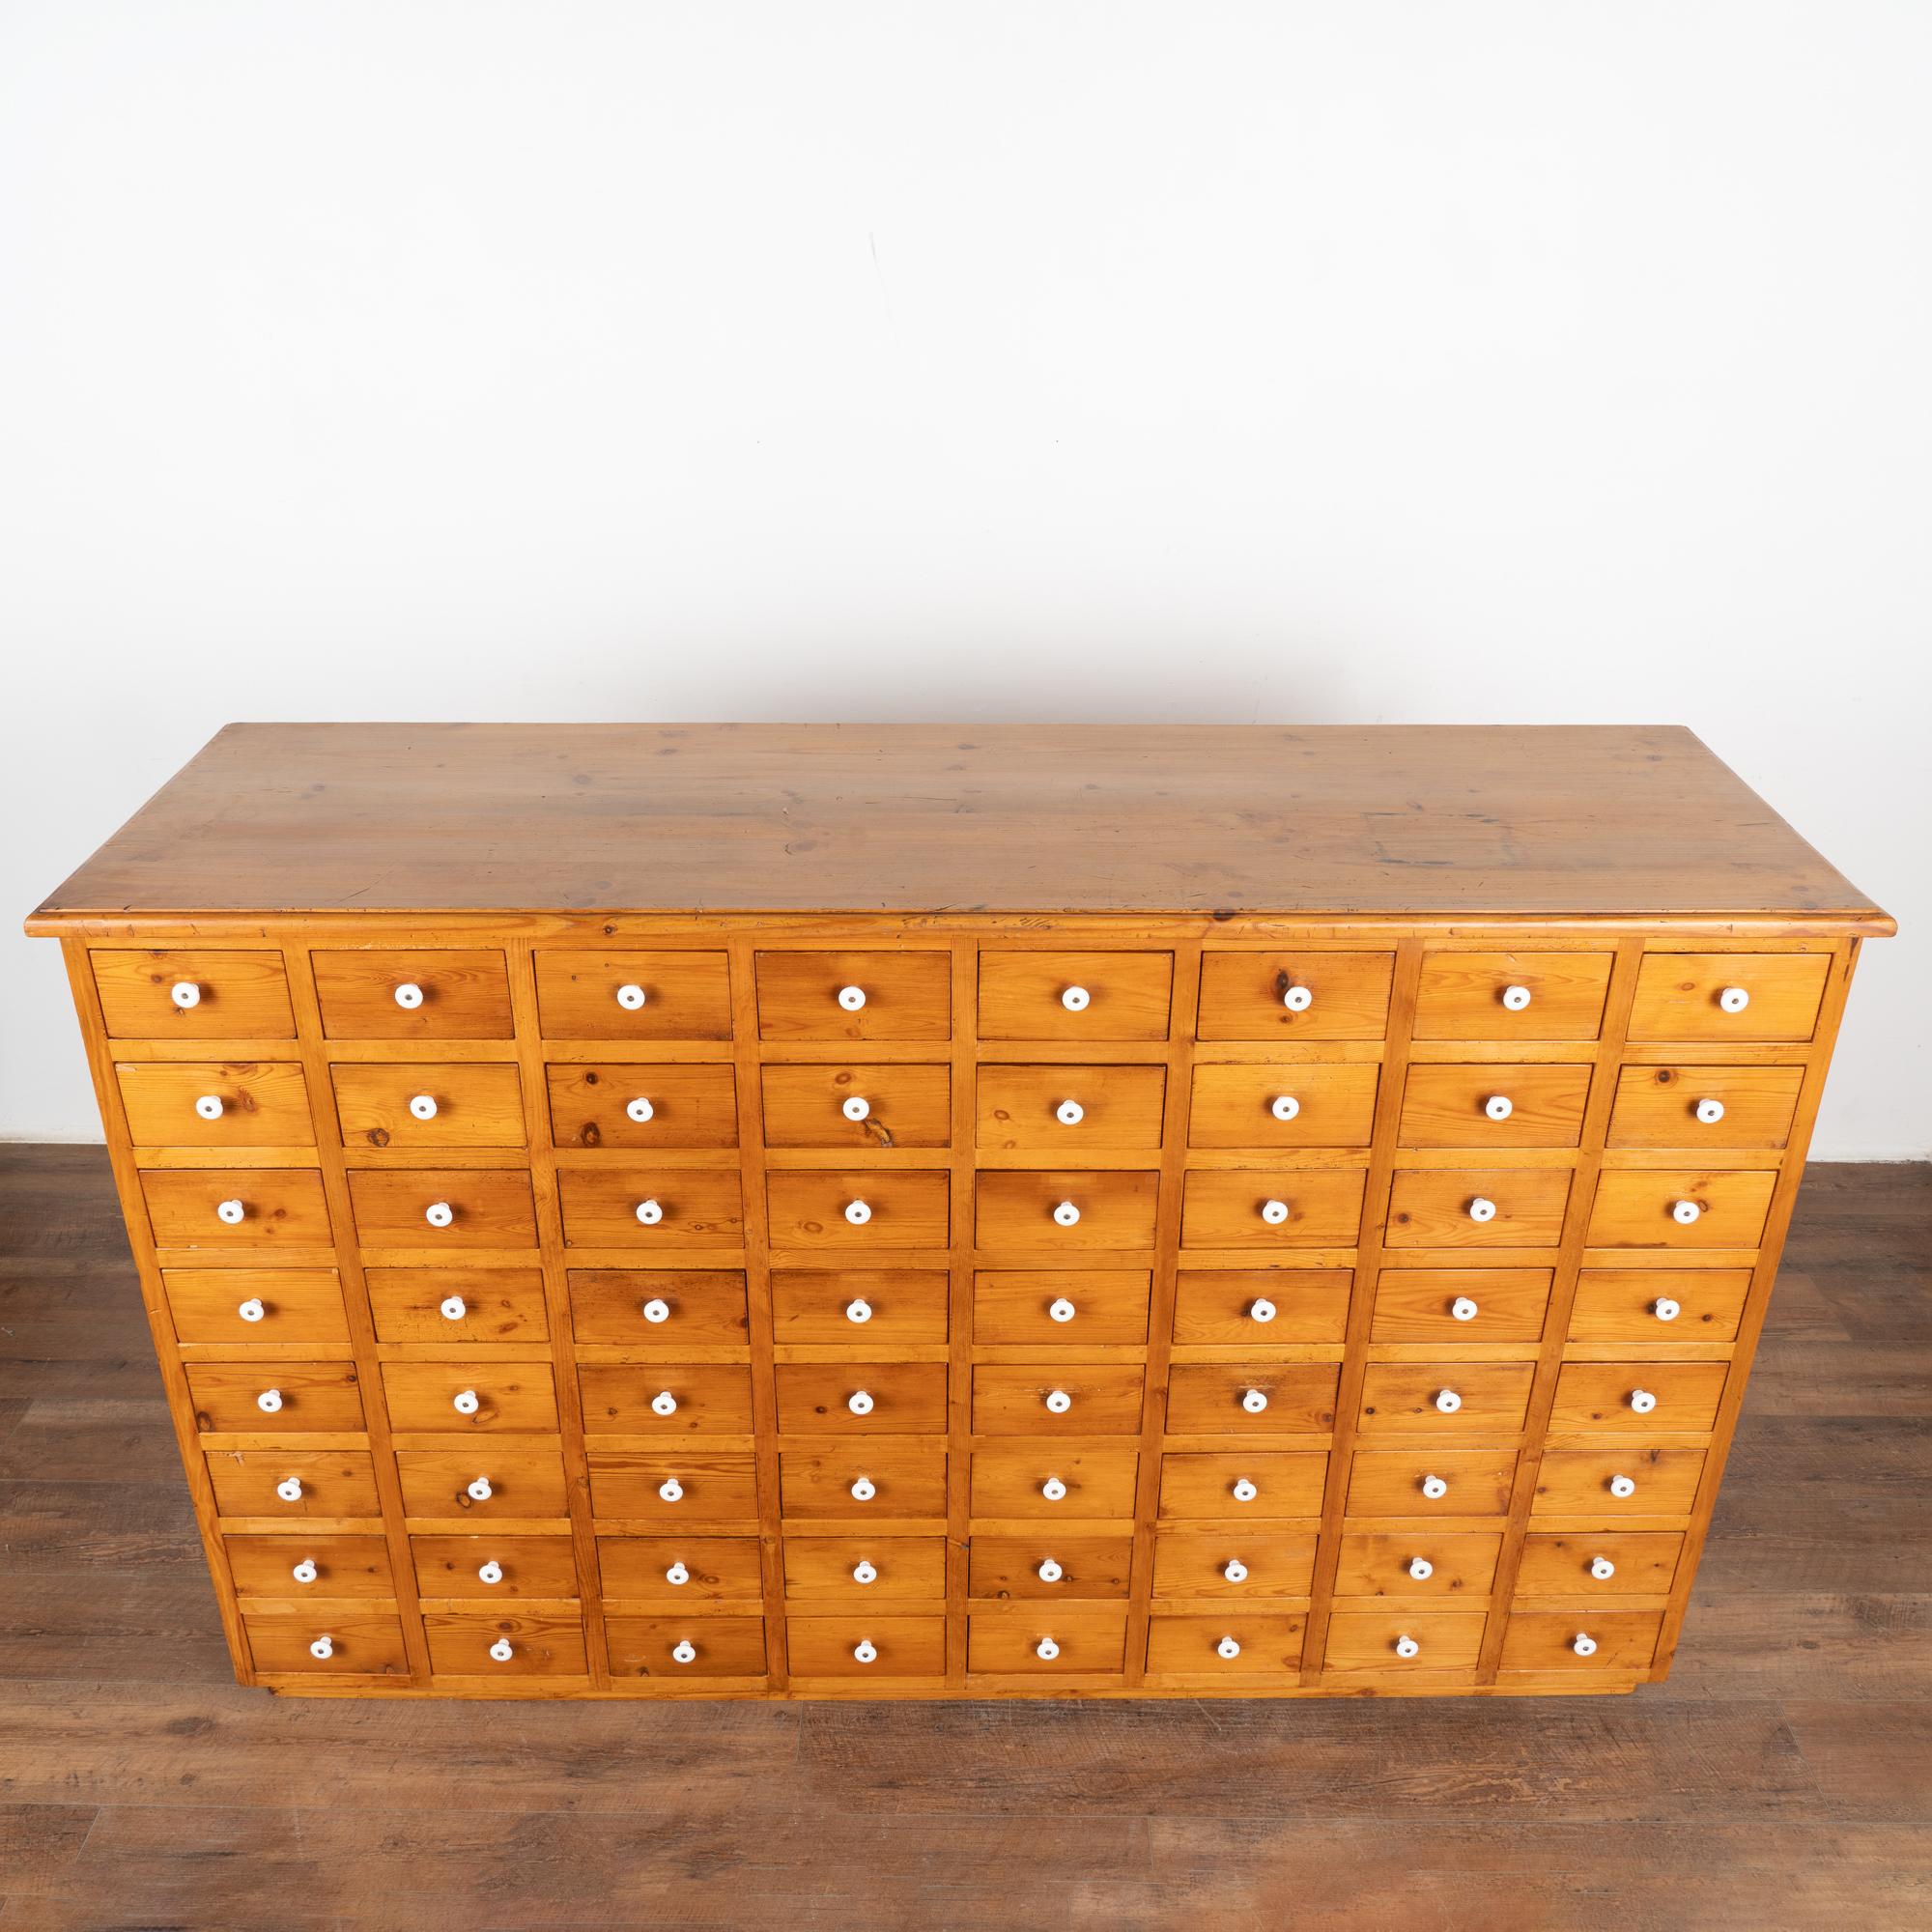 Country Free Standing Pine Apothecary Counter with 64 Drawers, Kitchen Island circa 1900 For Sale